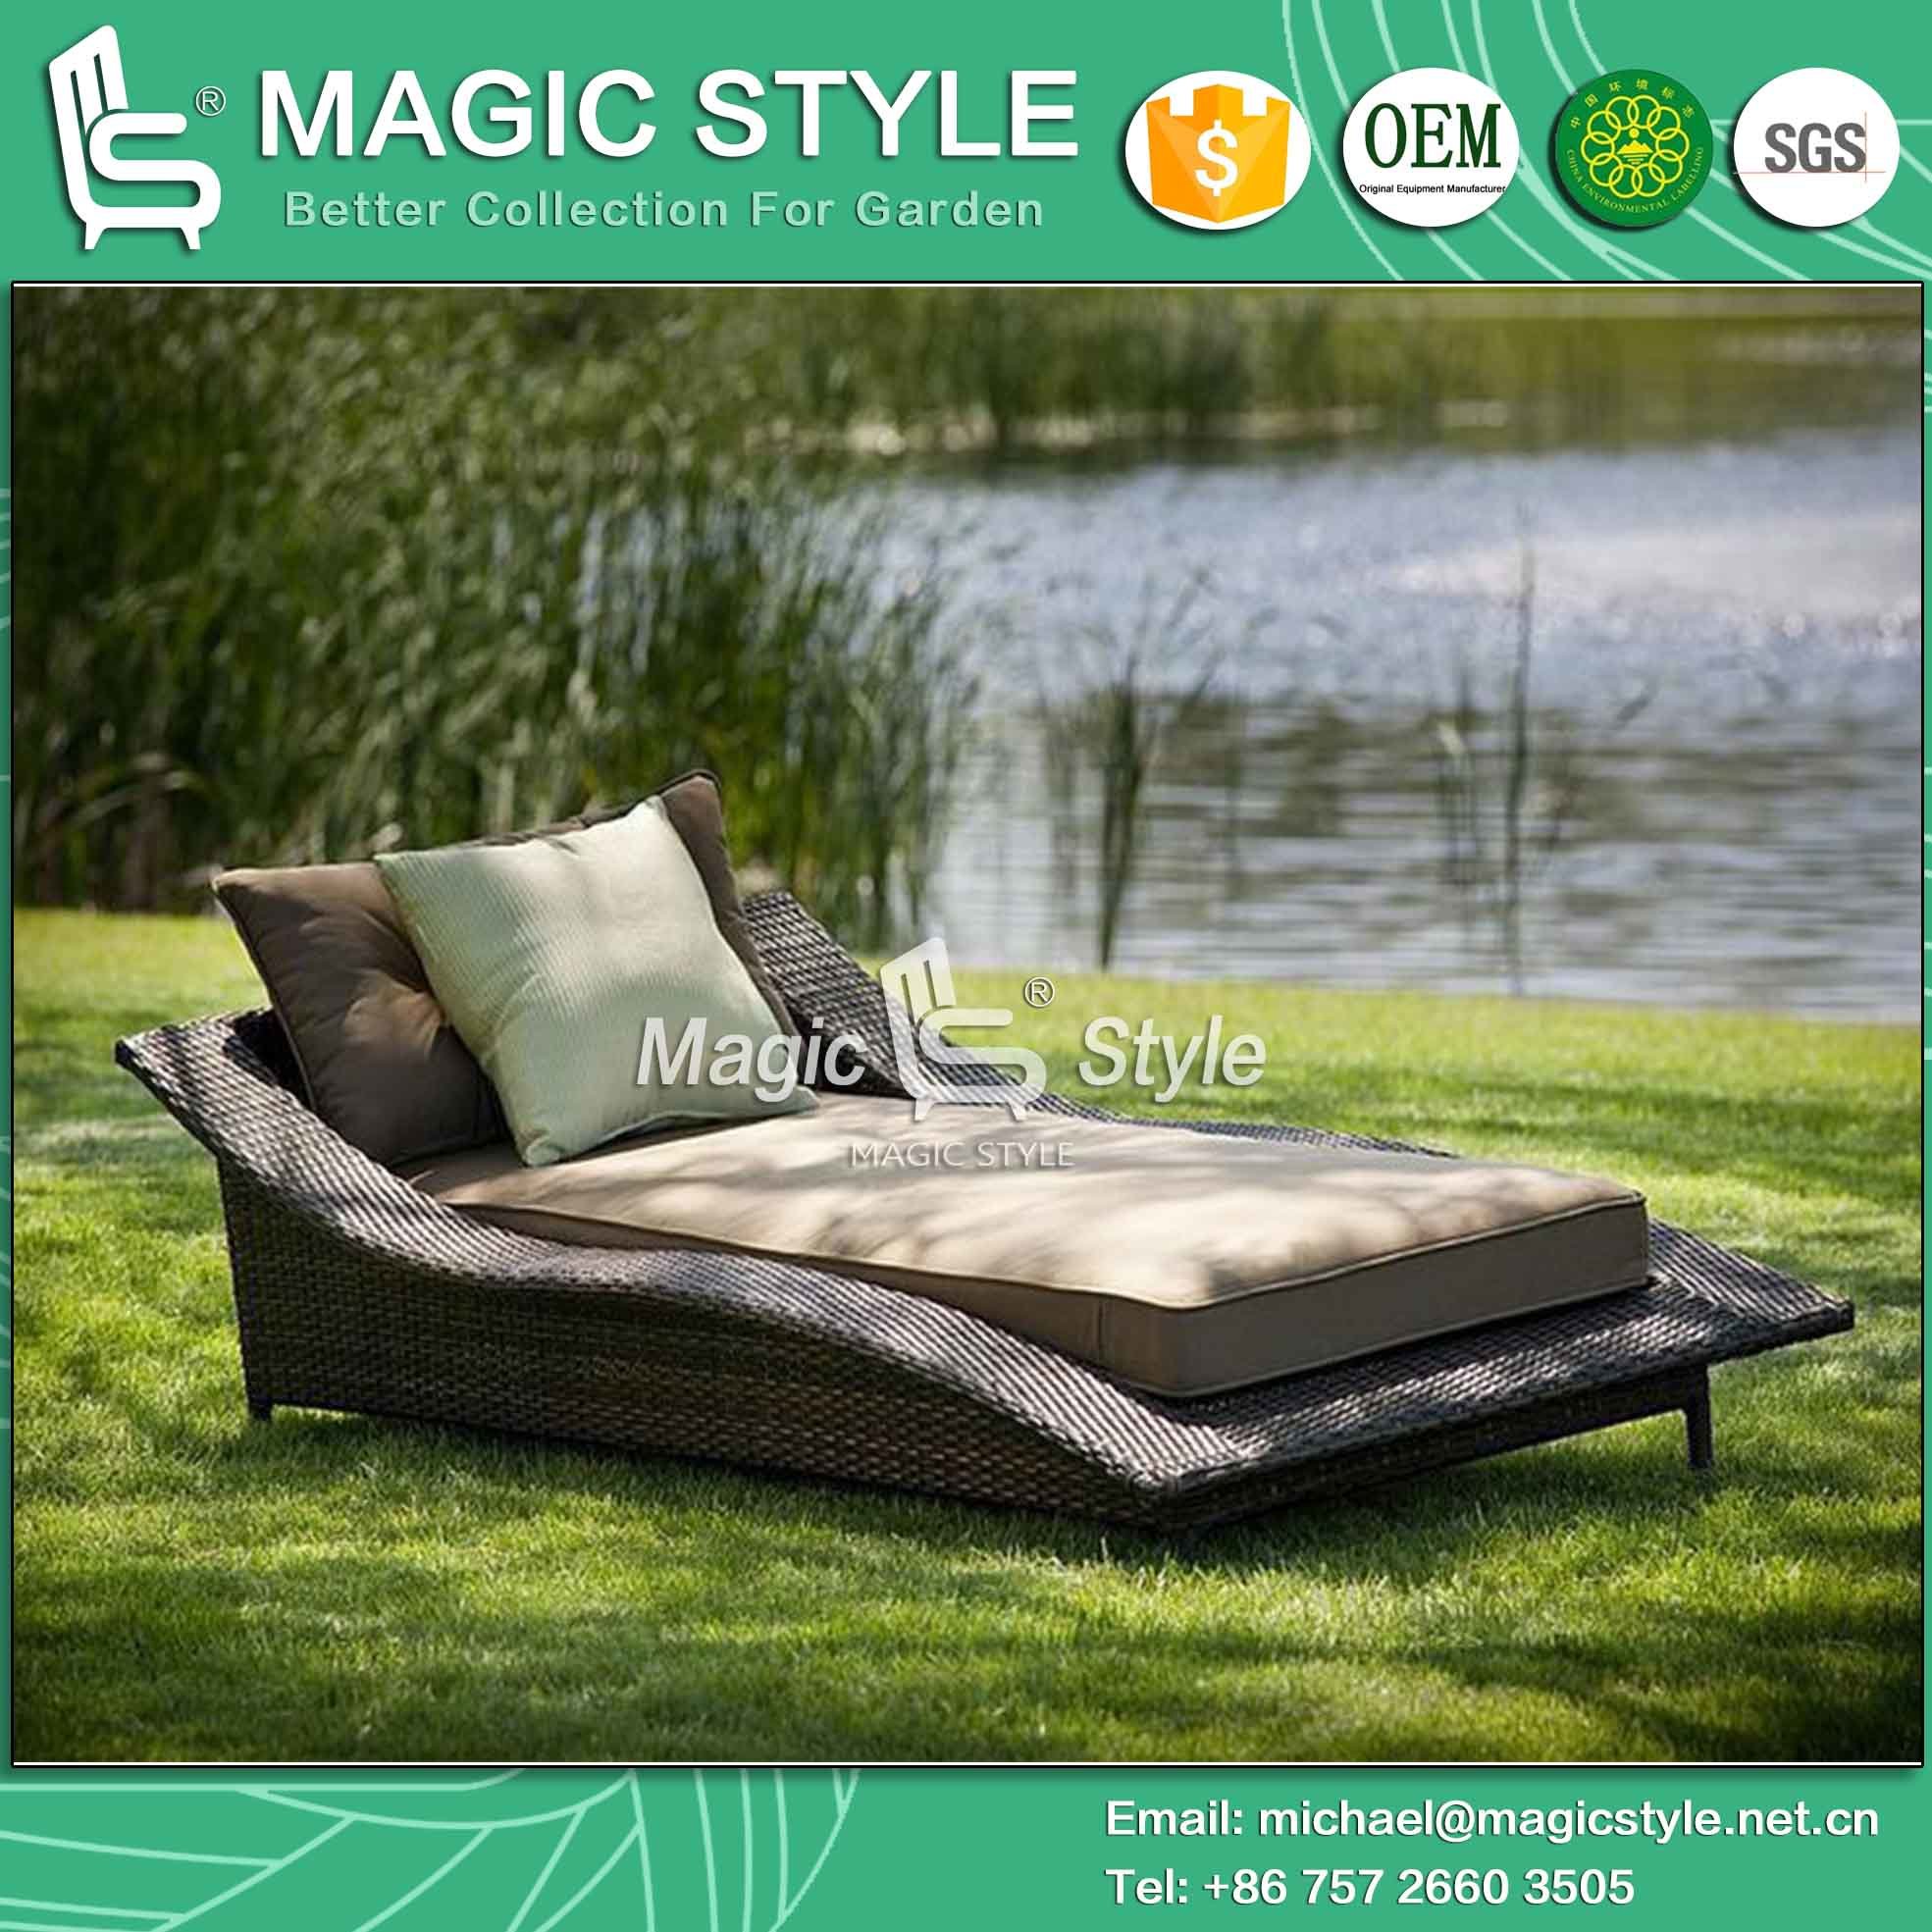 Rattan Wicker Sunlounger Wicker Daybed Double Daybed Outdoor Furniture Patio Furniture Chaise Lounge Garden Lounger Hotel Project (Magic Style)